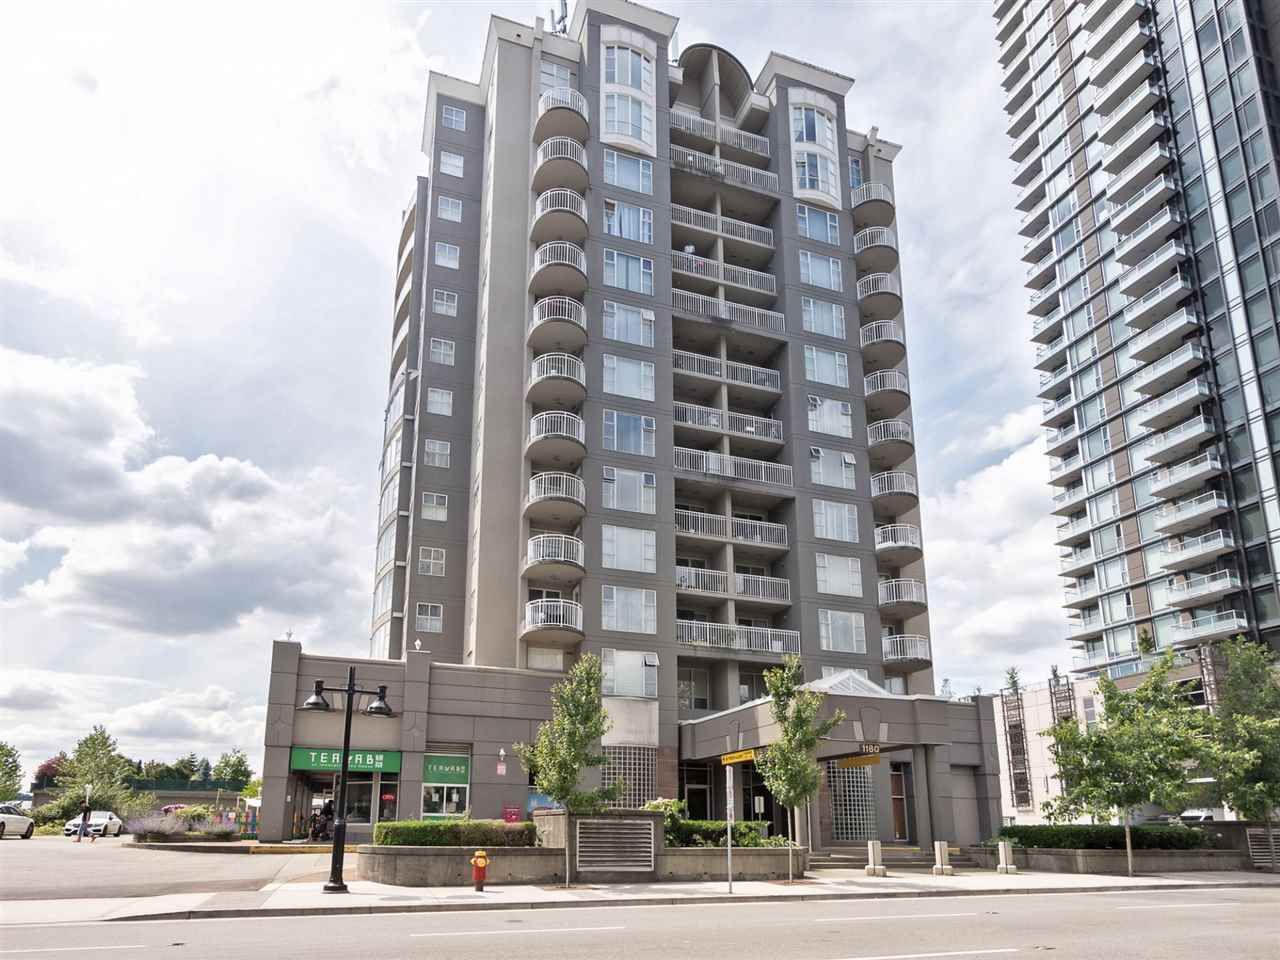 Main Photo: 306 1180 PINETREE Way in Coquitlam: North Coquitlam Condo for sale : MLS®# R2276350